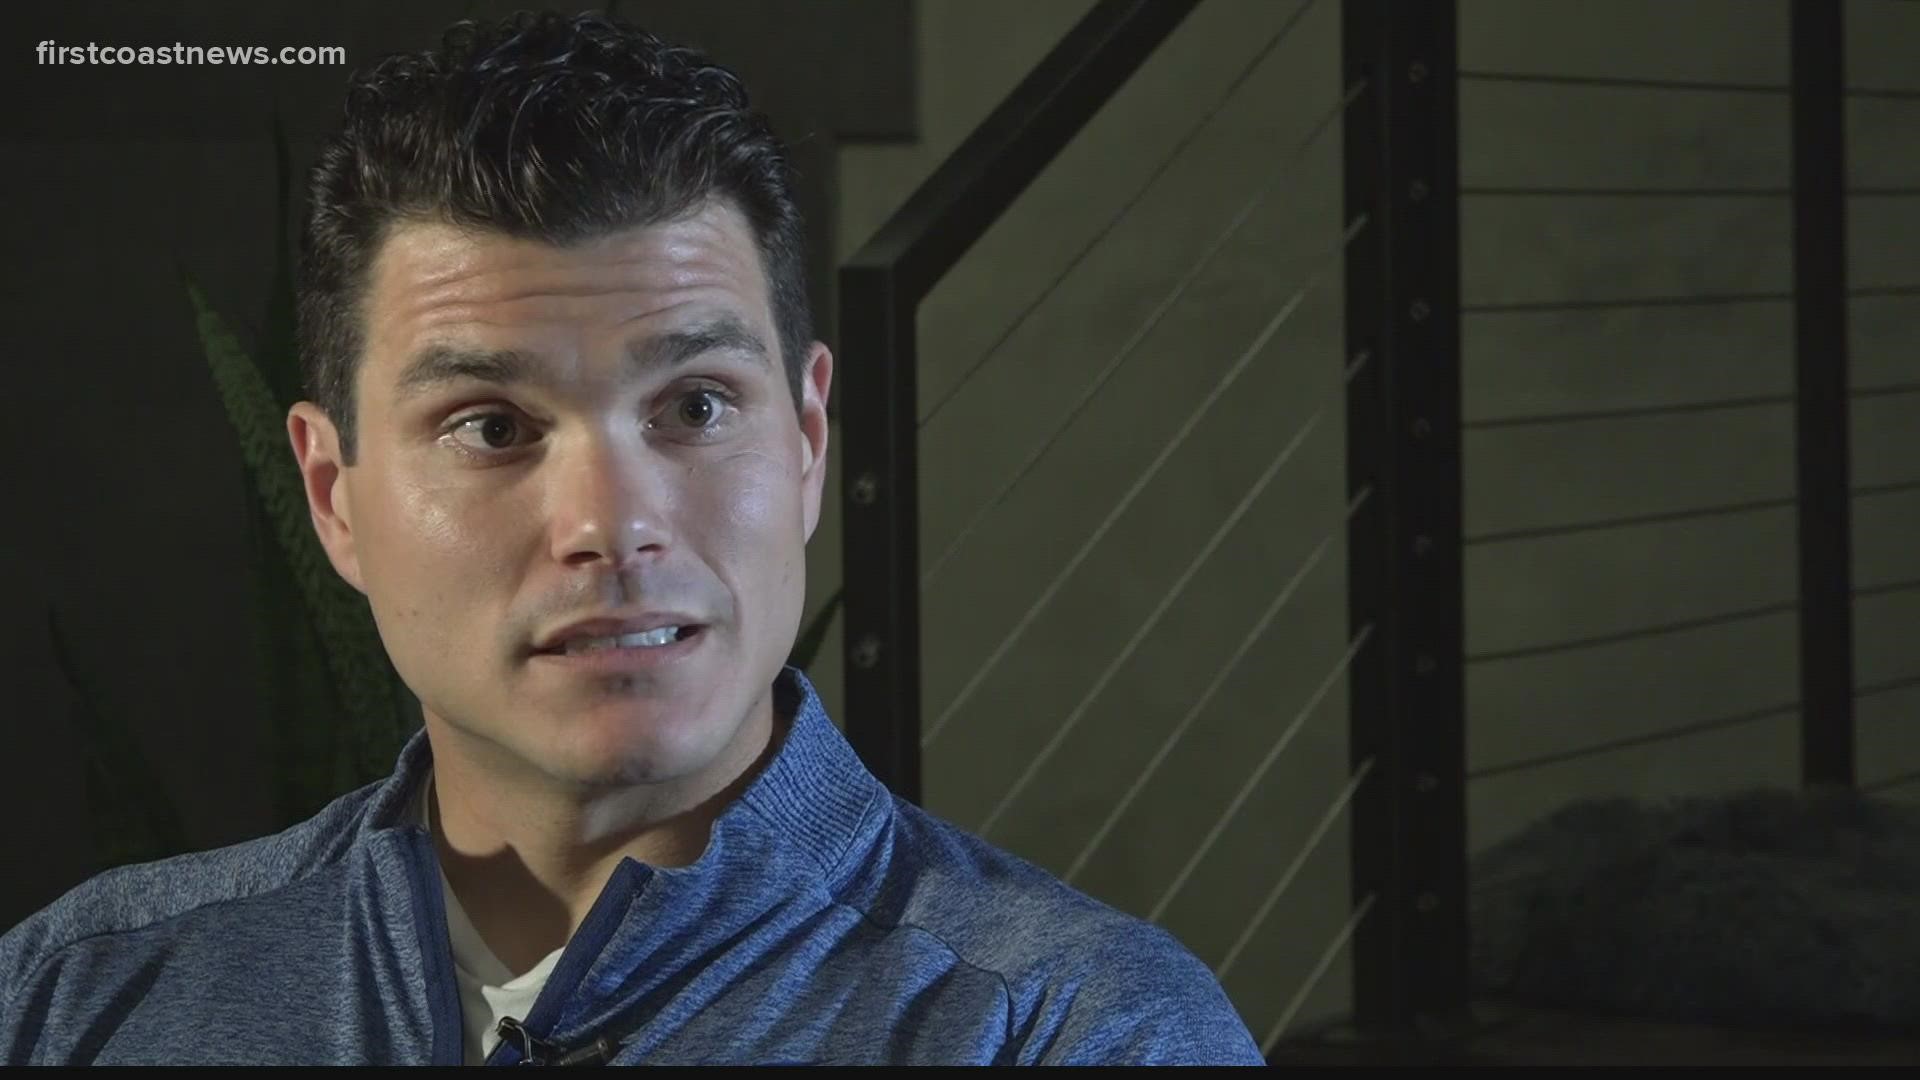 Former Jacksonville Jaguars kicker Josh Lambo spoke to First Coast News only about what he's says was a toxic environment for him under Urban Meyer.